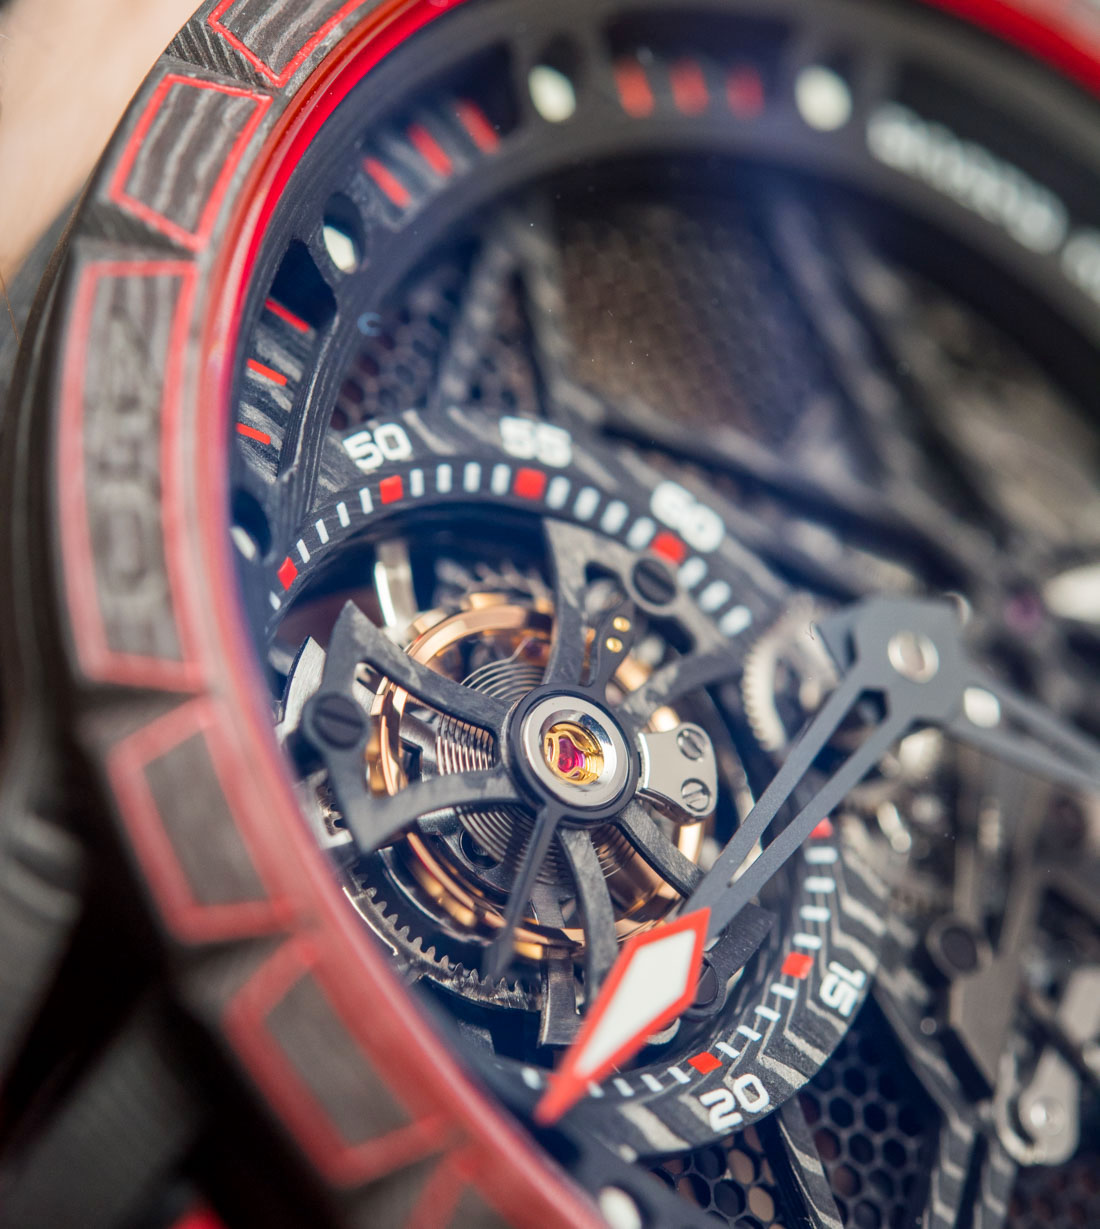 Roger Dubuis Excalibur Carbon Spider Watch Hands-On Hands-On 